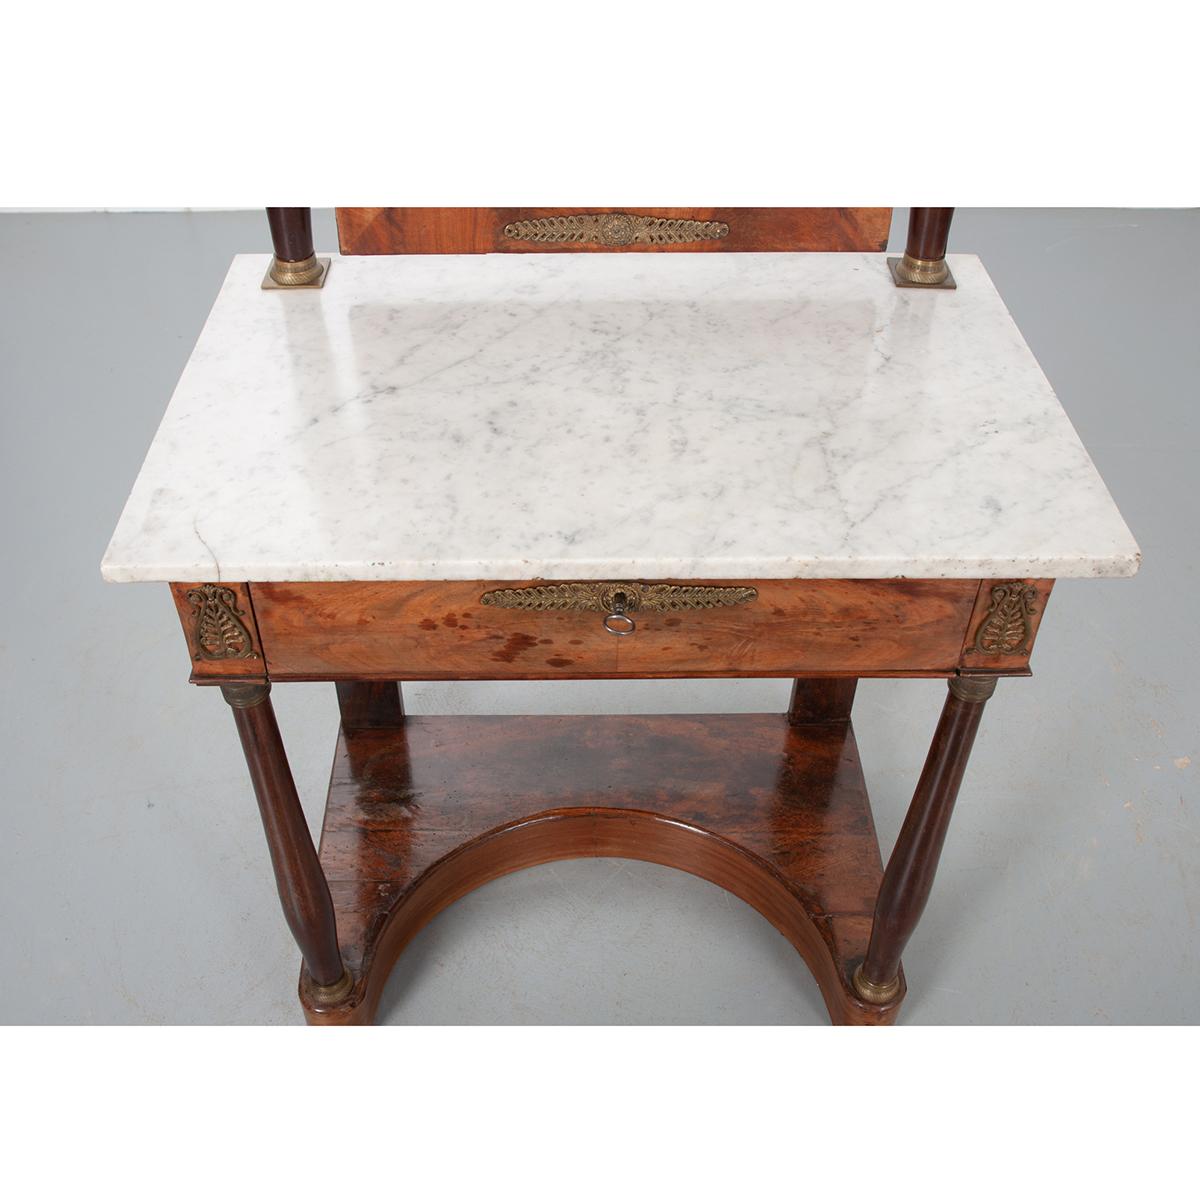 This exceptional mahogany dressing table is complete with its original mercury glass pivoting mirror and white marble top. The mirror has foxing and is framed with beautiful mahogany trim with brass ormolu details across the top and bottom. It is